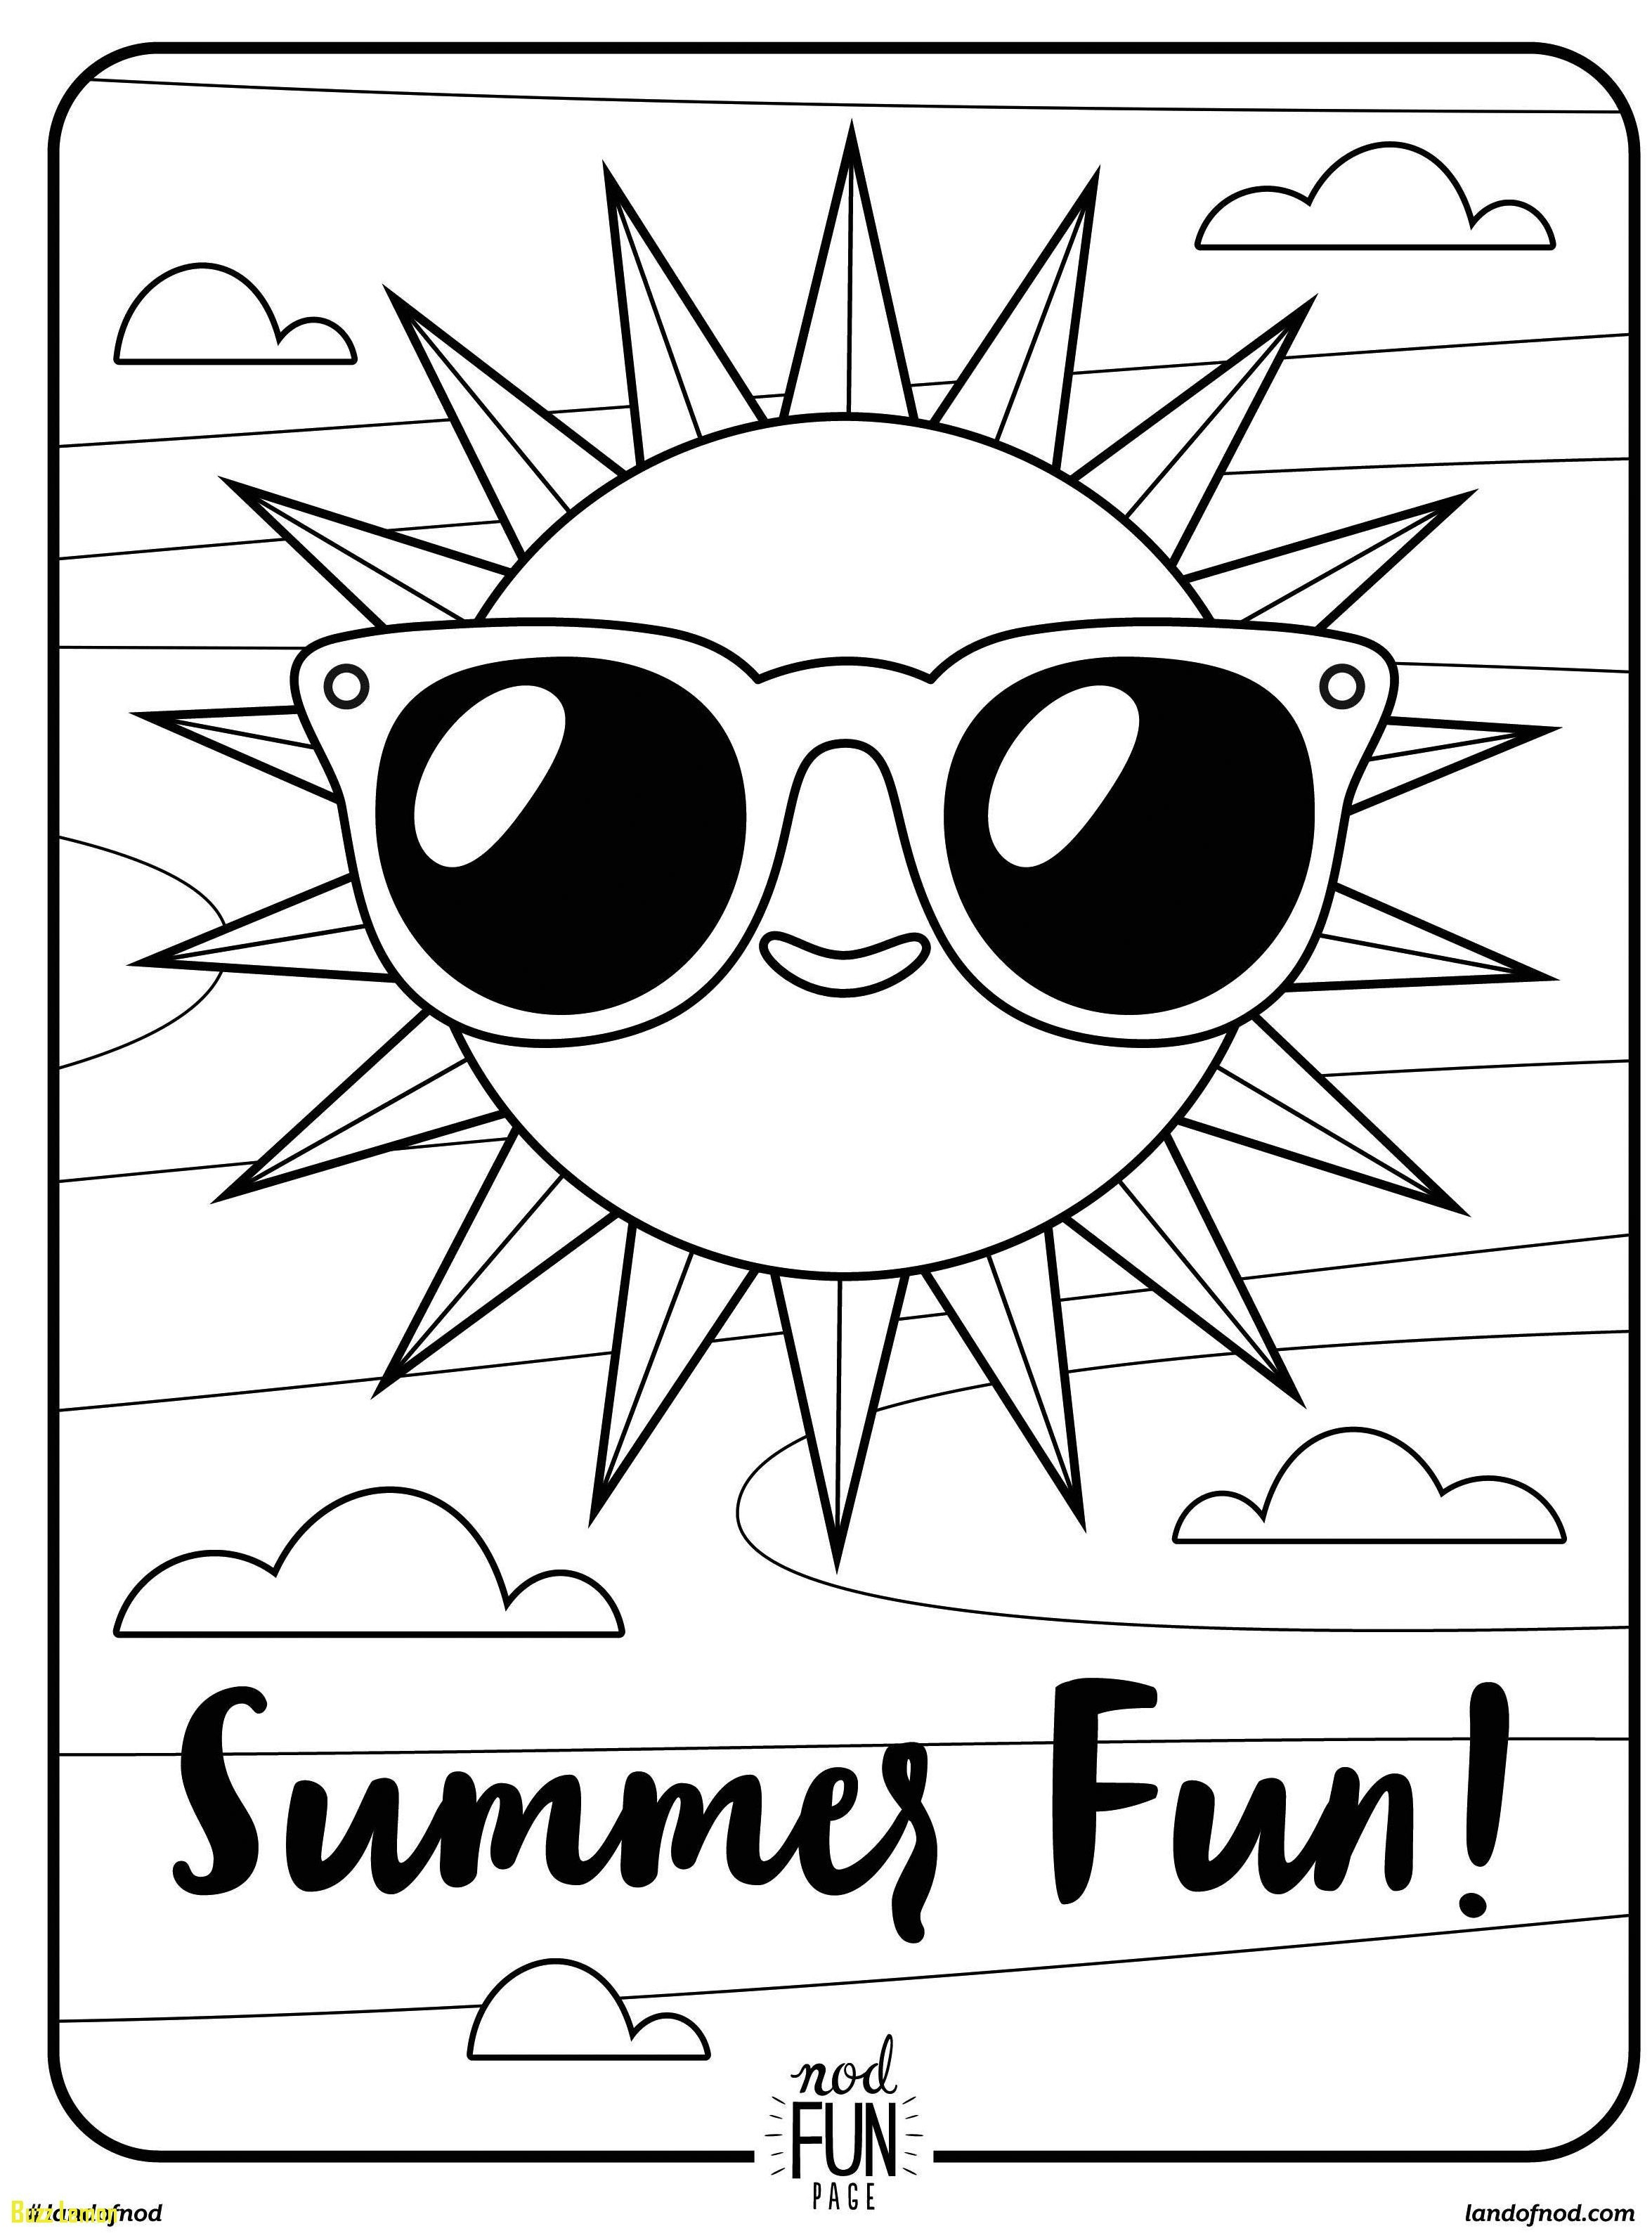 Perhaps the best 20 Summer Coloring Pages For Adults – homeicon.info